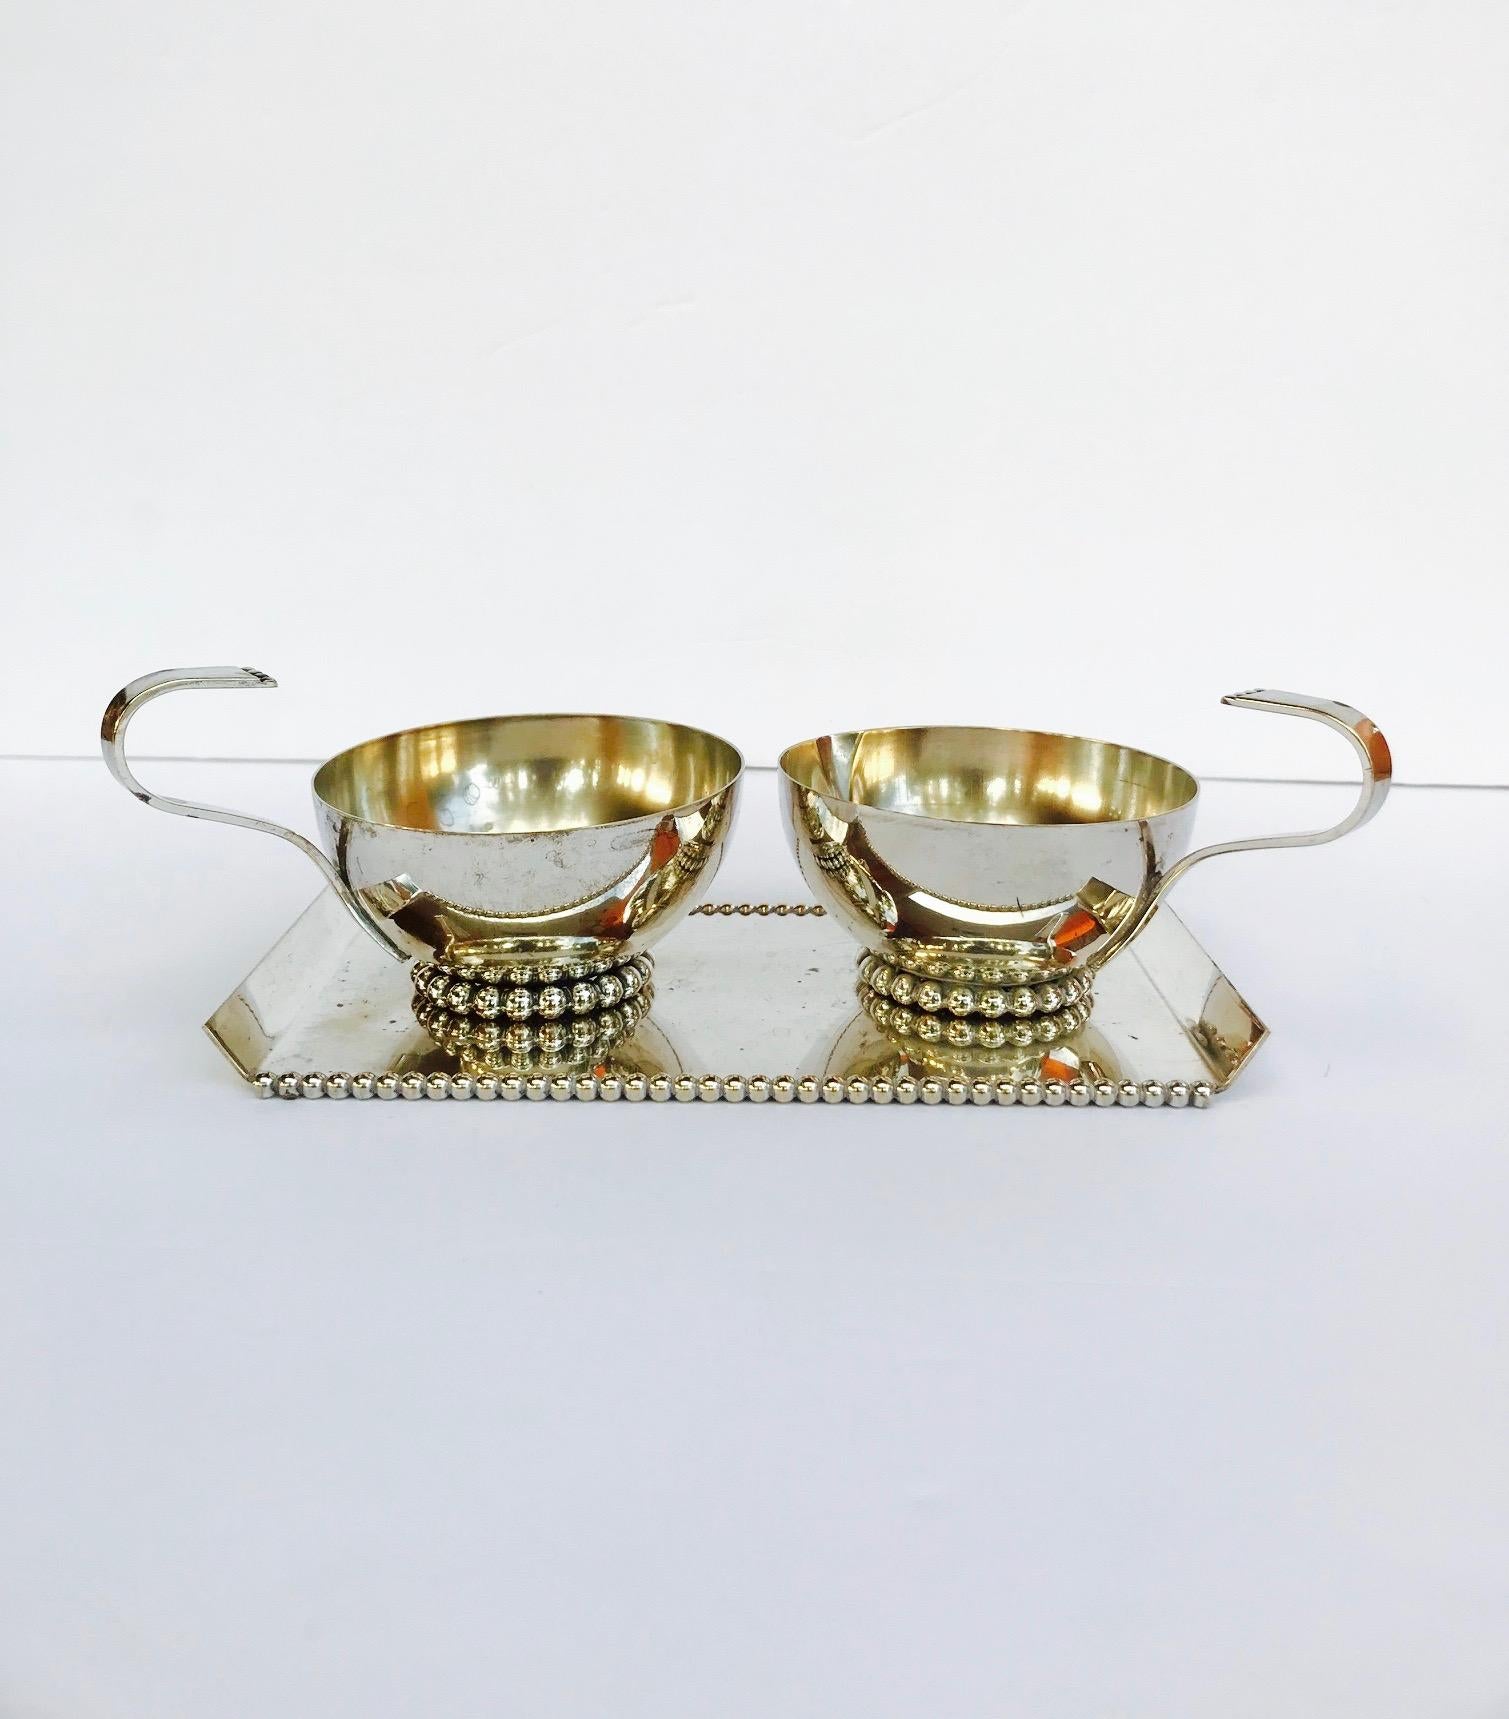 Italian Mid-Century Modern serving set handcrafted from silver plated metal. The set features handled creamer with spout and handled sugar bowl. Both pieces have elegant saucer forms with stylized hand forged handles. 
Modernist serving tray